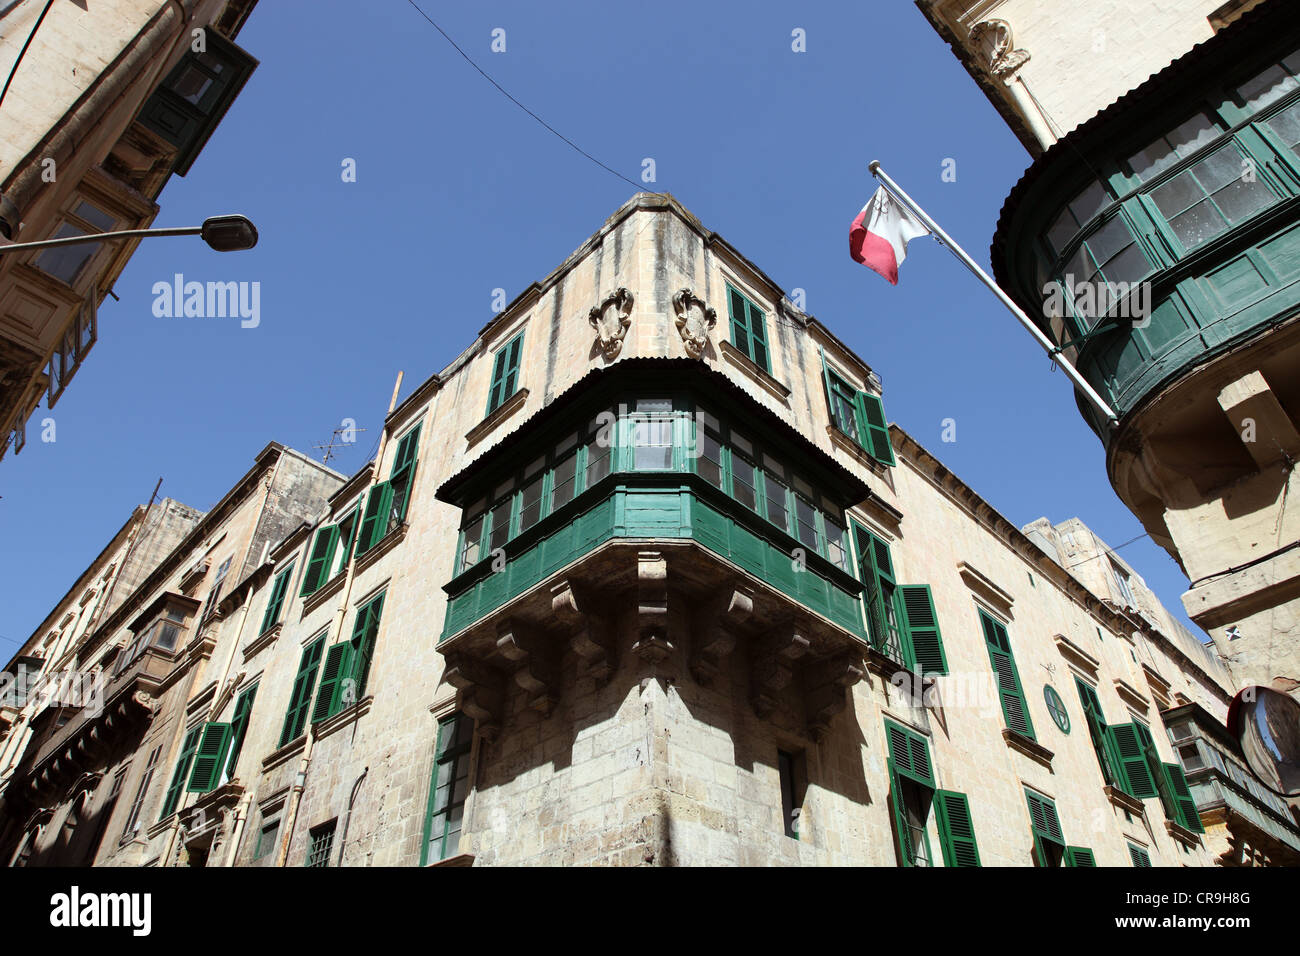 Valletta townscape showing vernacular architecture Stock Photo